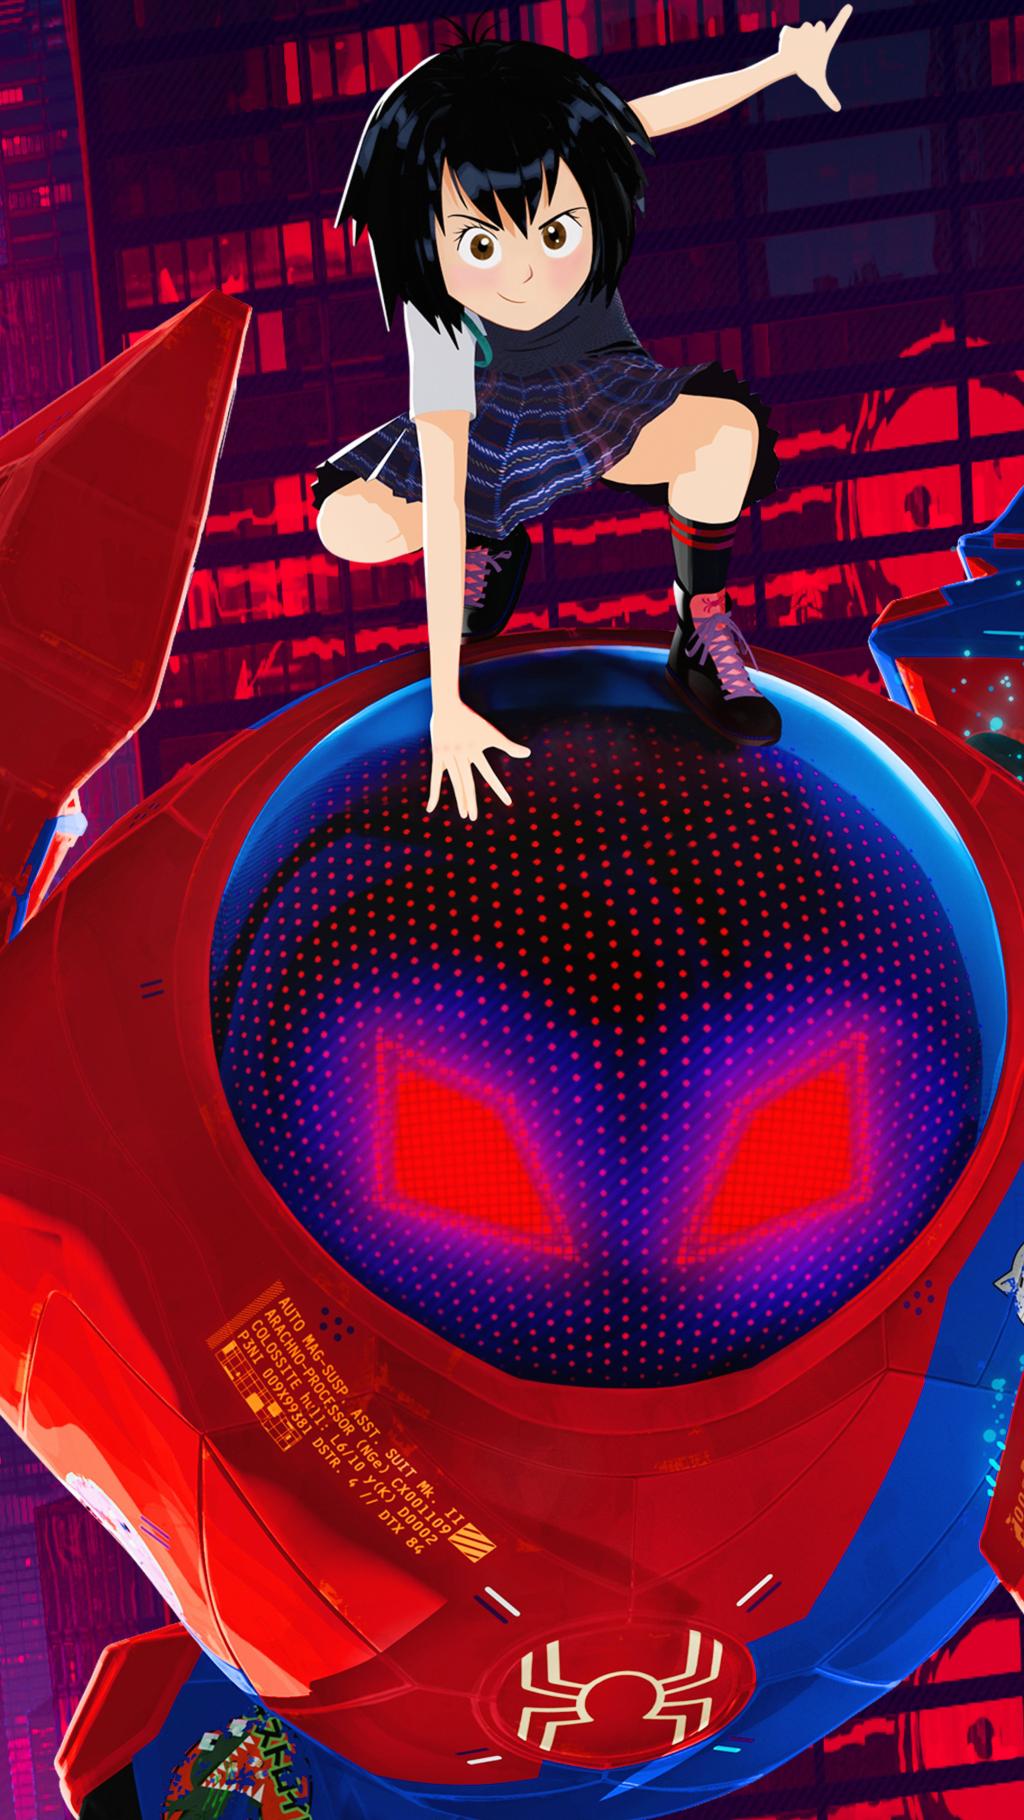 peni-parker-and-sp-dr-in-spider-man-into-the-spider-verse-official-poster-5k-dq-2160x3840.jpg